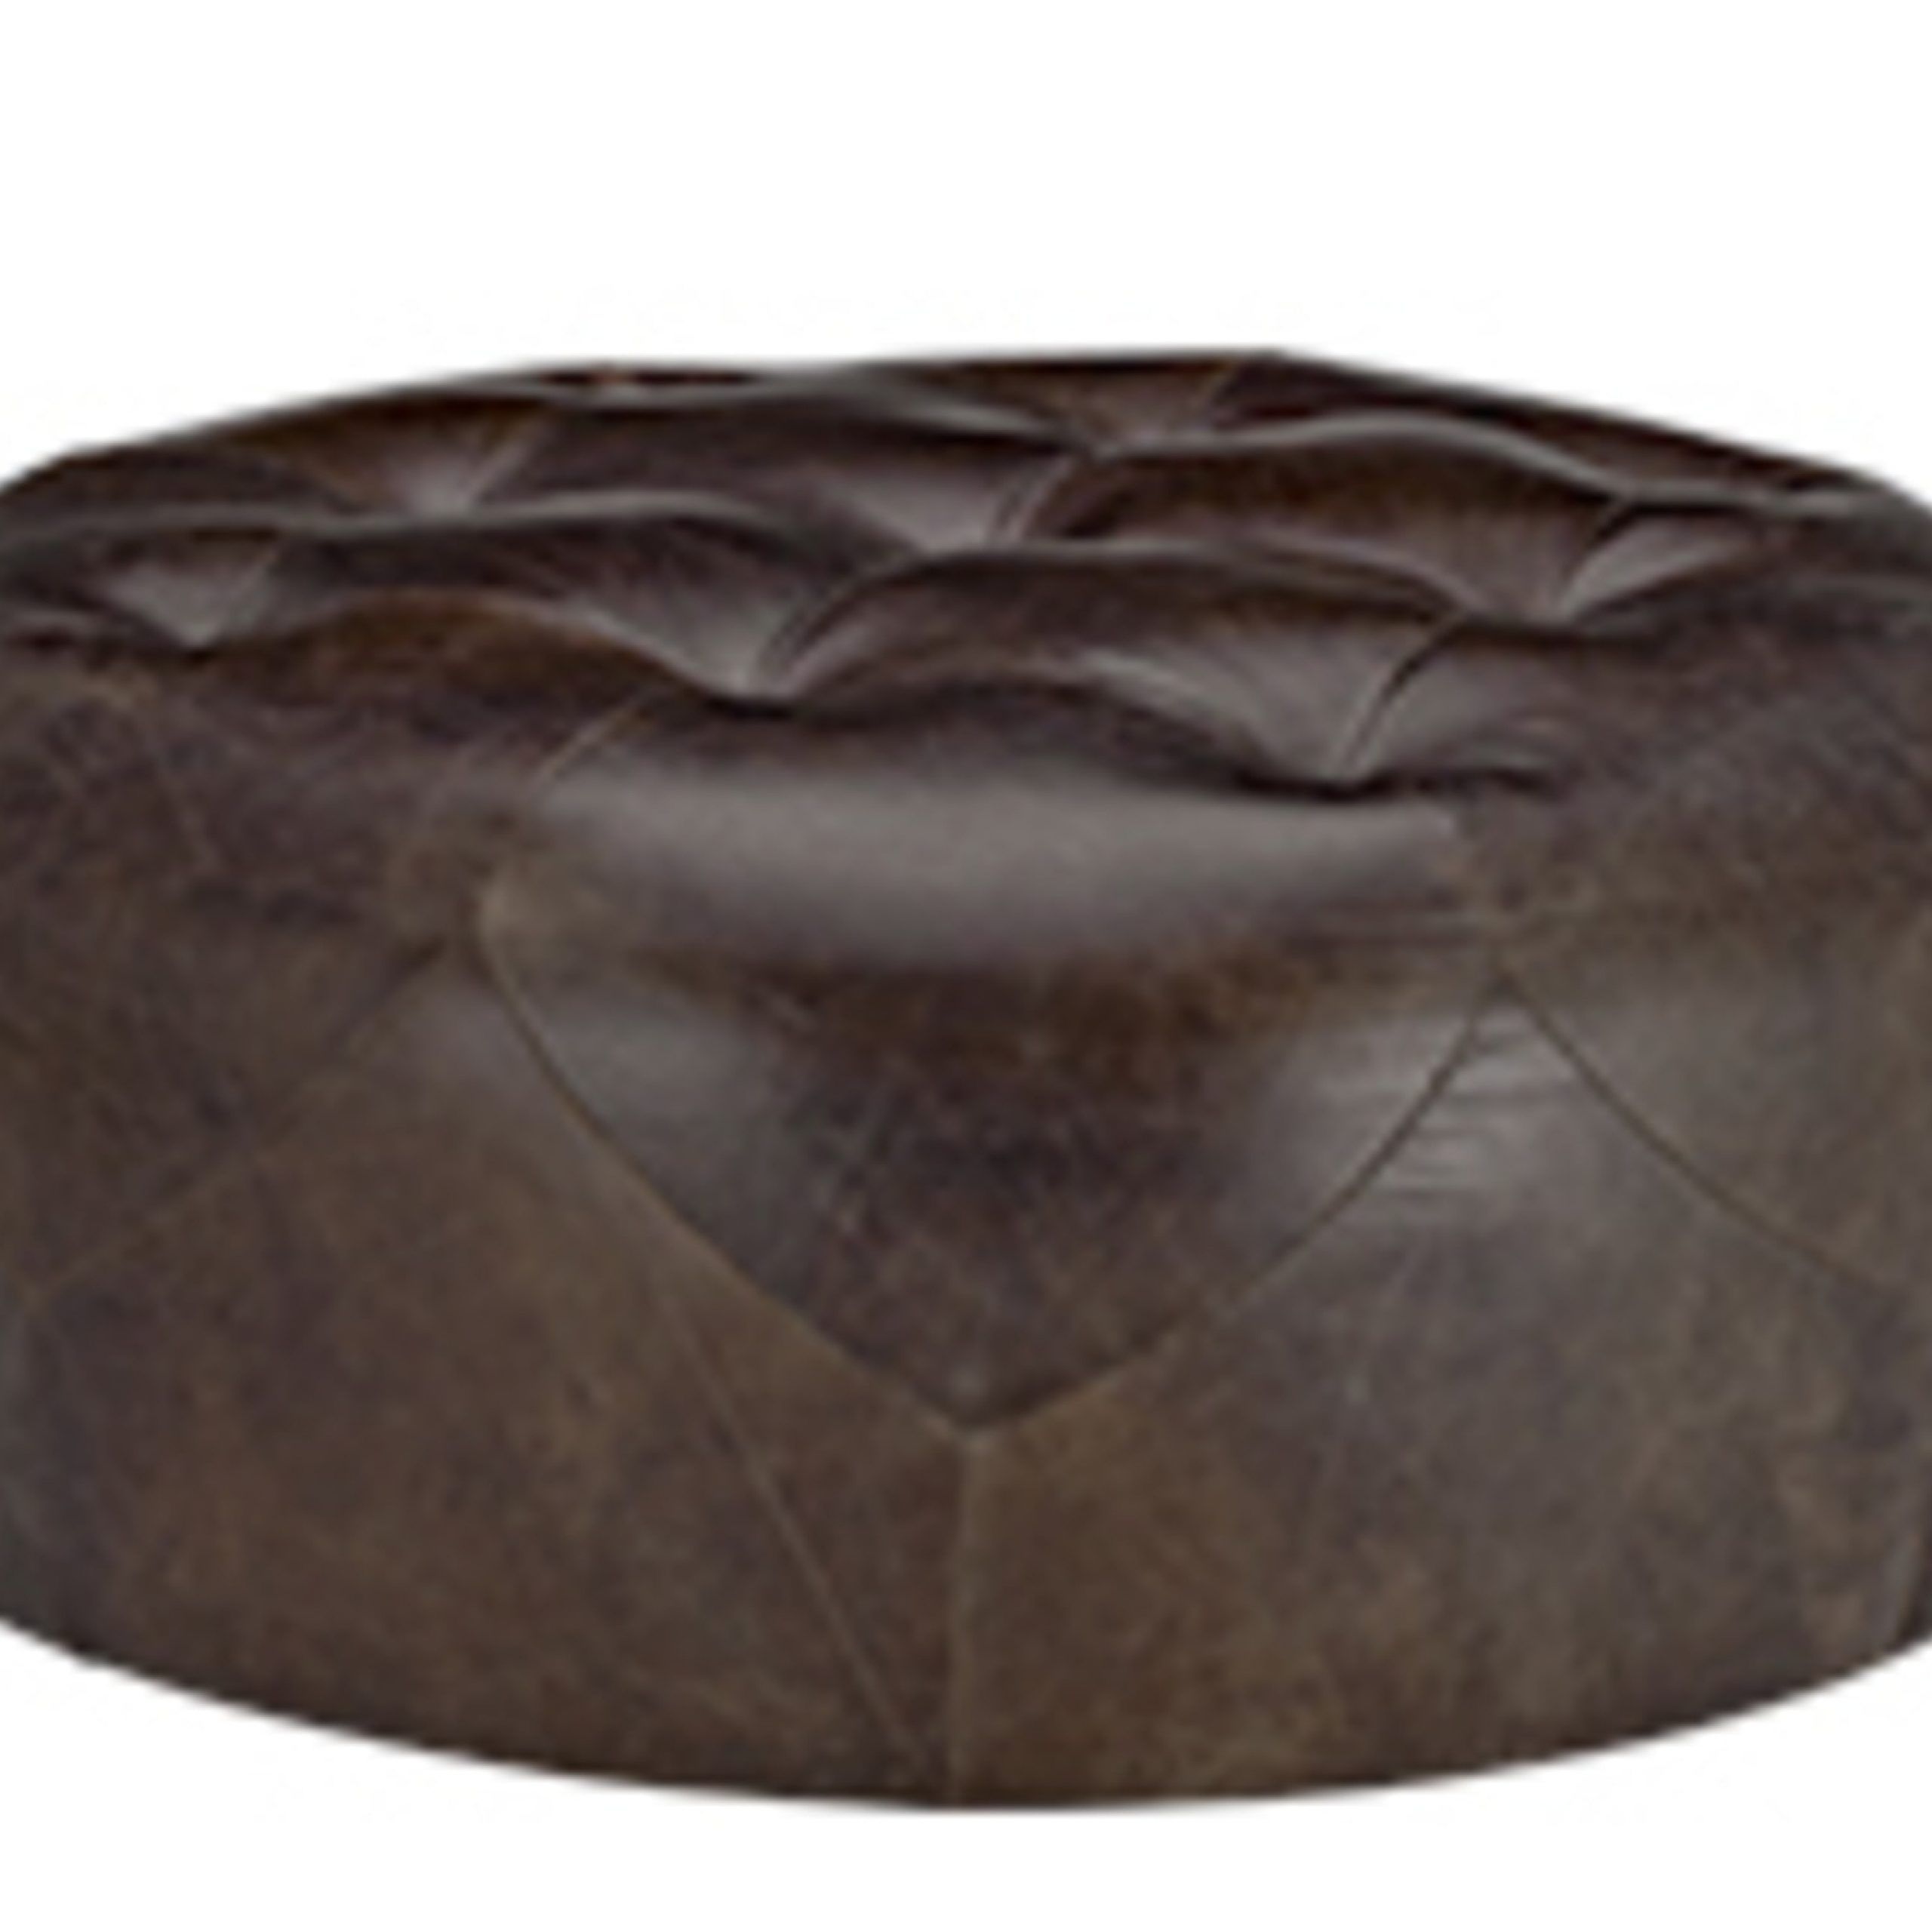 Scott Large Round Ottoman In Vintage Brown Premium Leather (View 5 of 10)